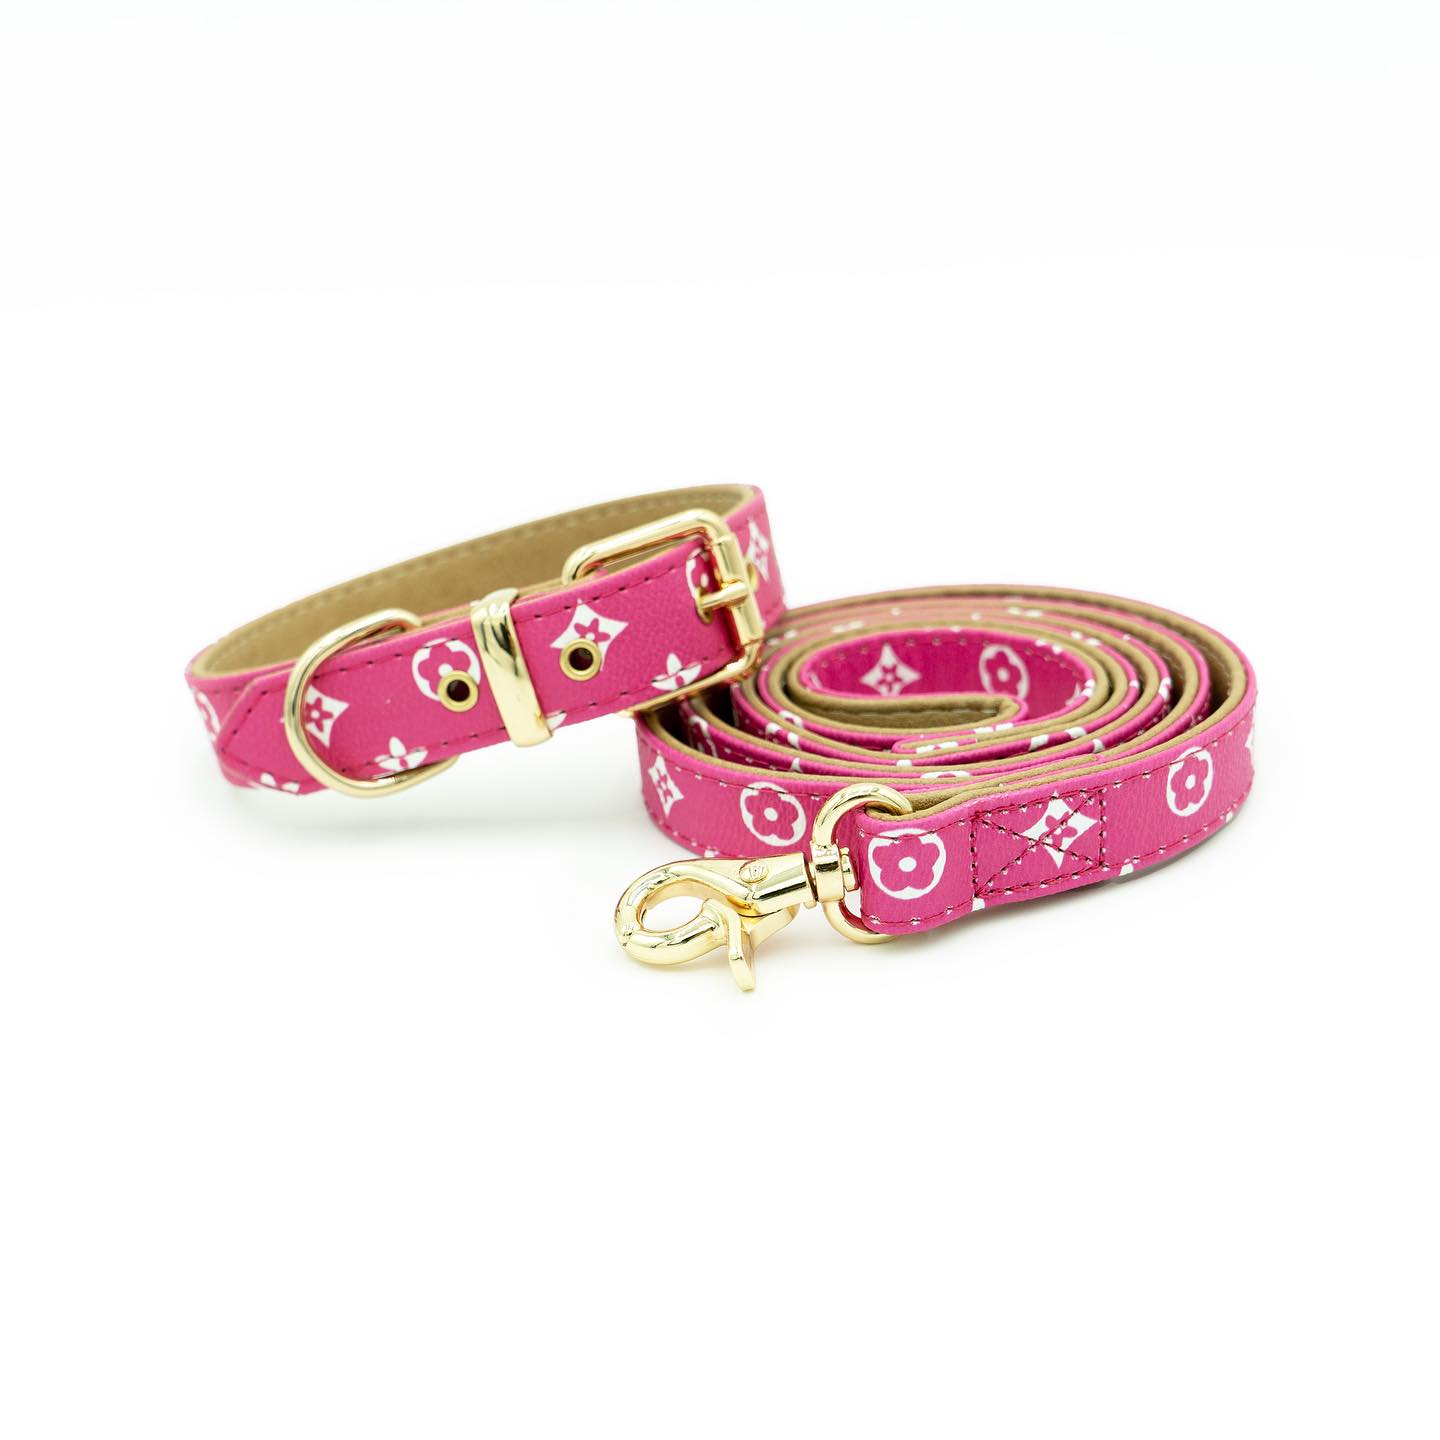 Back in stock !! Our LV Collar and Leash sets are now back in stock in all colors. Shop at petsupplymafia.com 